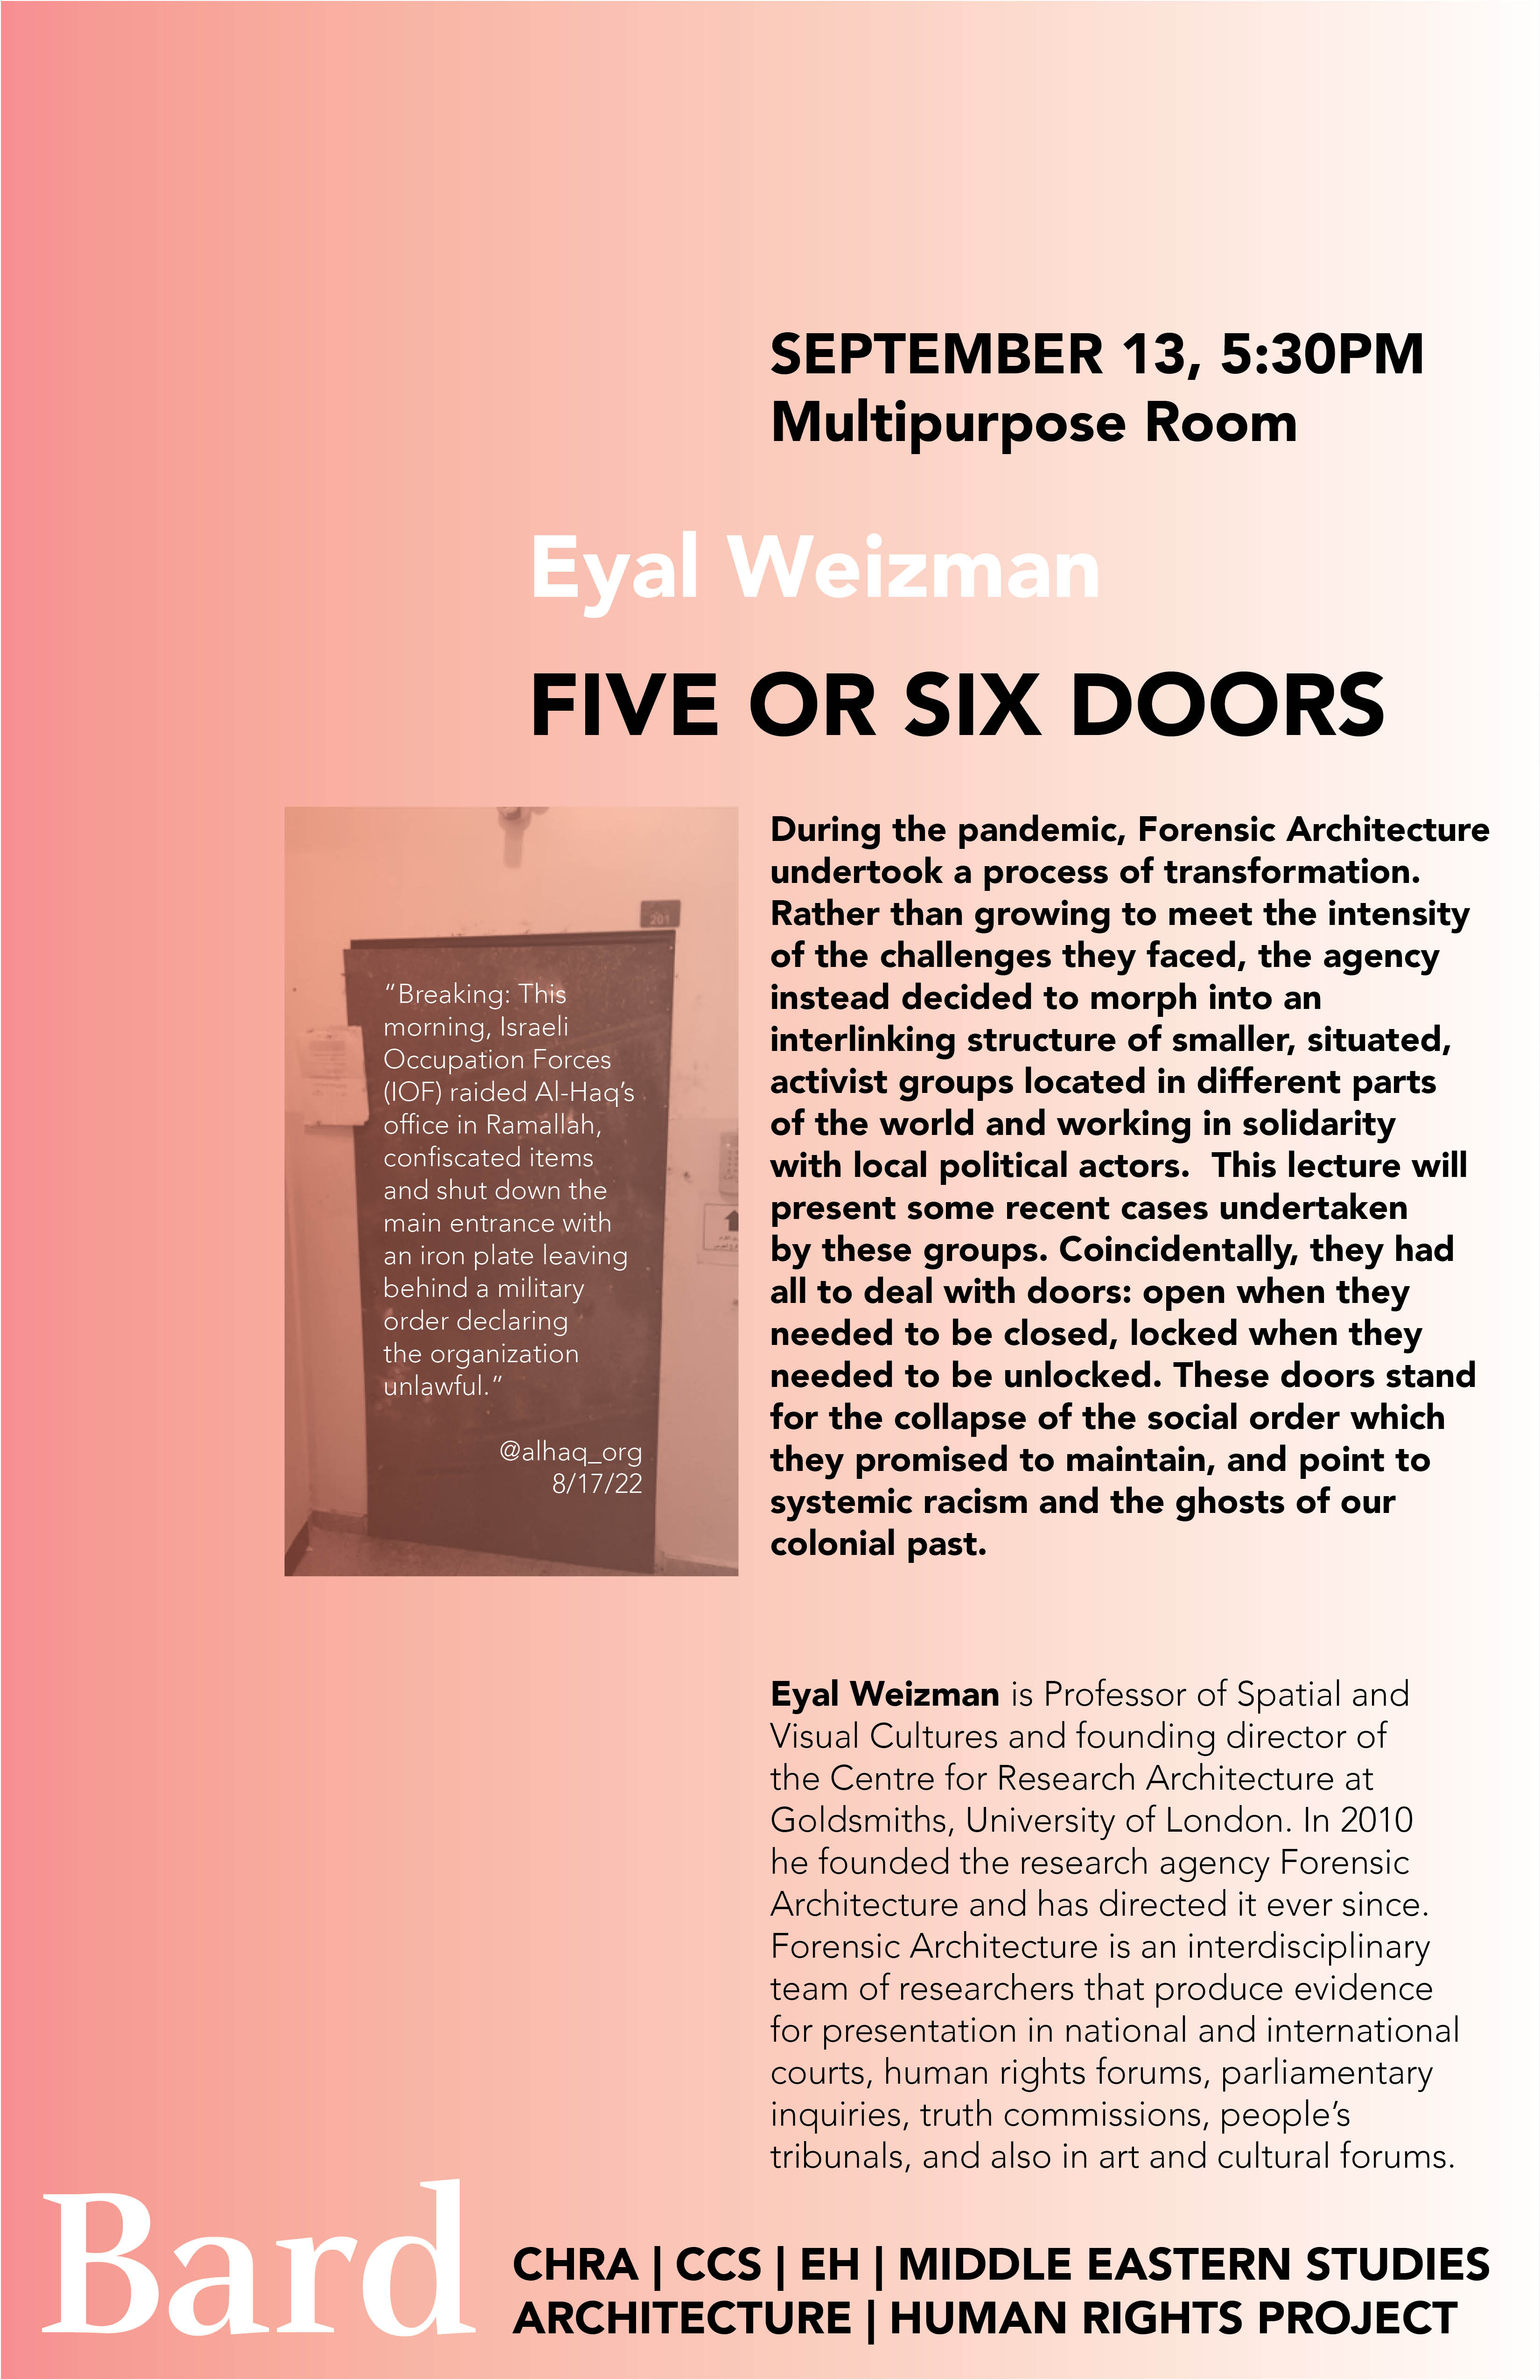 Human Rights Project Events: Eyal Weizman, Five or Six Doors